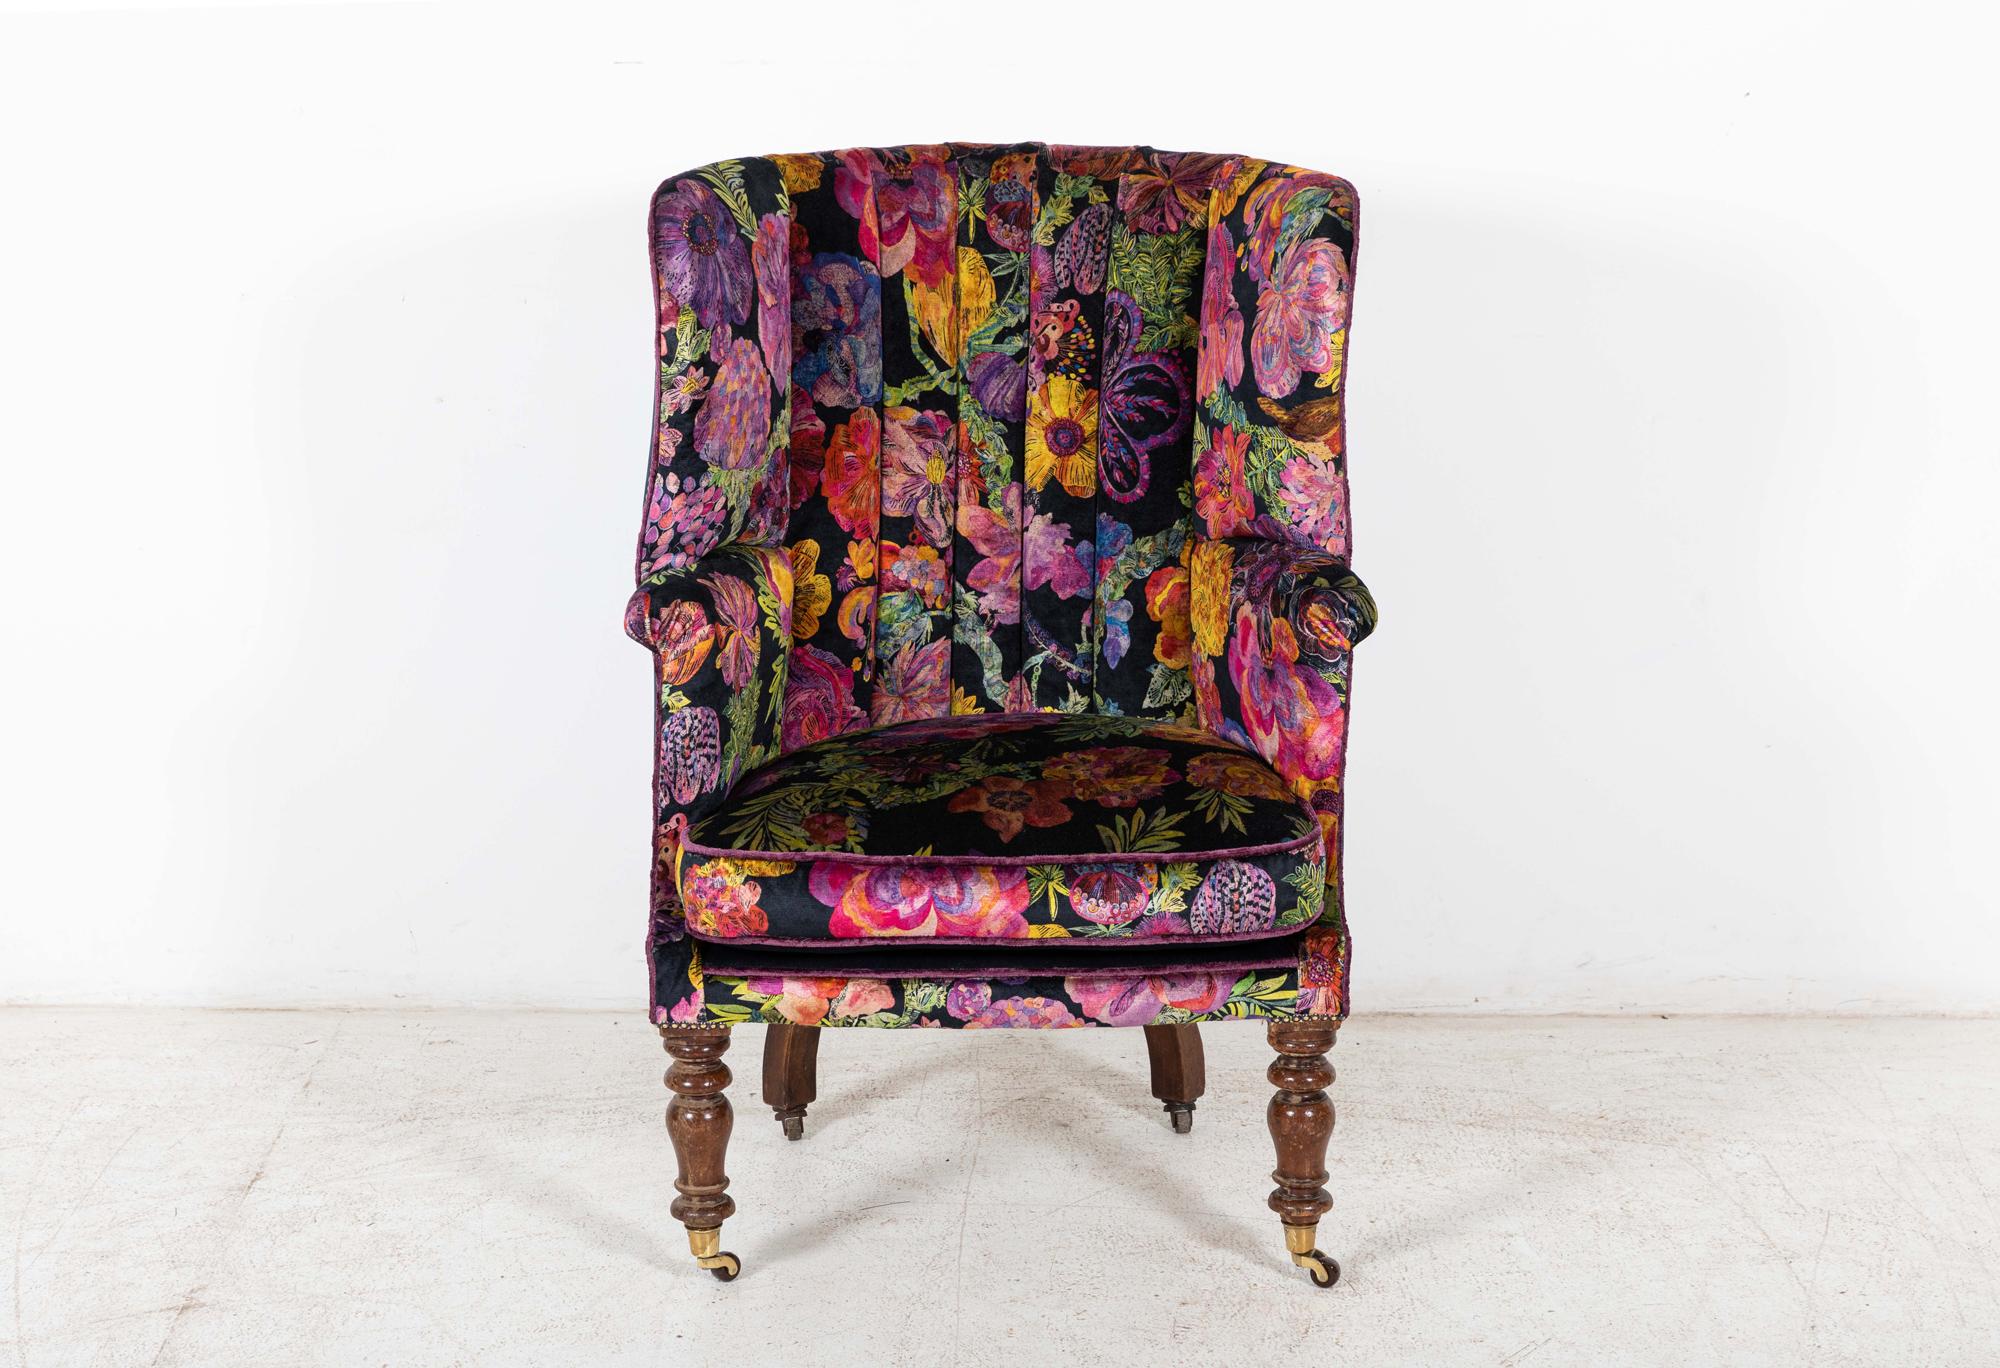 Circa 1880

19thC English Porters Armchair Re-upholstered in Liberty Secret Garden sat on Mahogany legs and brass castors

sku 566

W70 x D74 x H109cm

Seat Height 50 cm